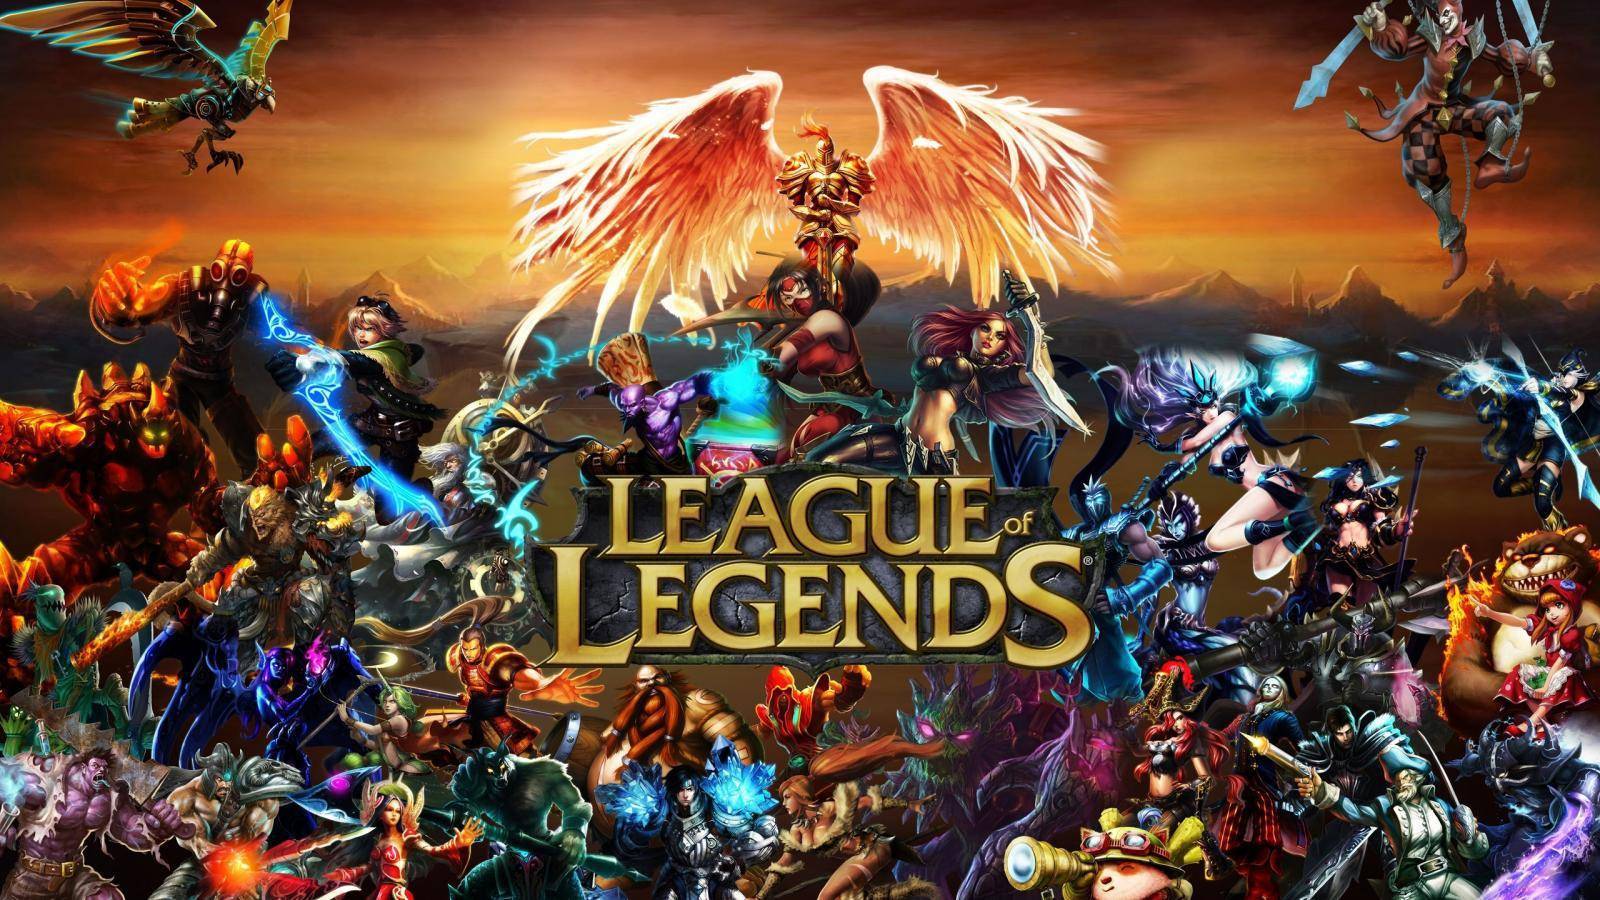 League of Legends Riot Points Card 10 EUR (PC) Key cheap - Price of | Game Cards & Gaming Guthaben